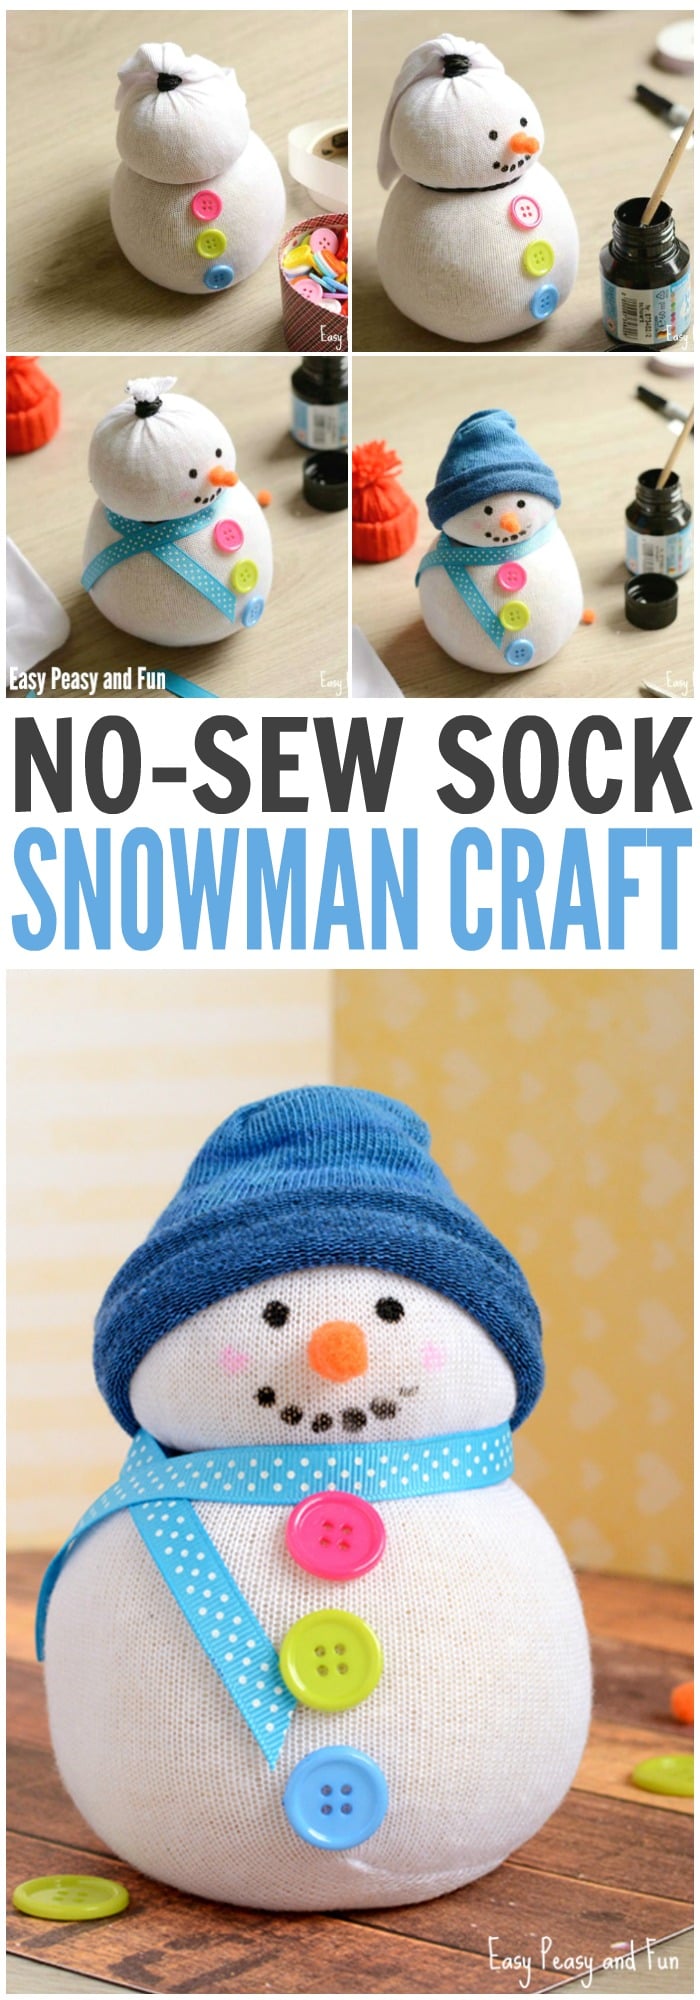 Seamless snowman crafts for kids and adults.  Such a fun DIY gift idea